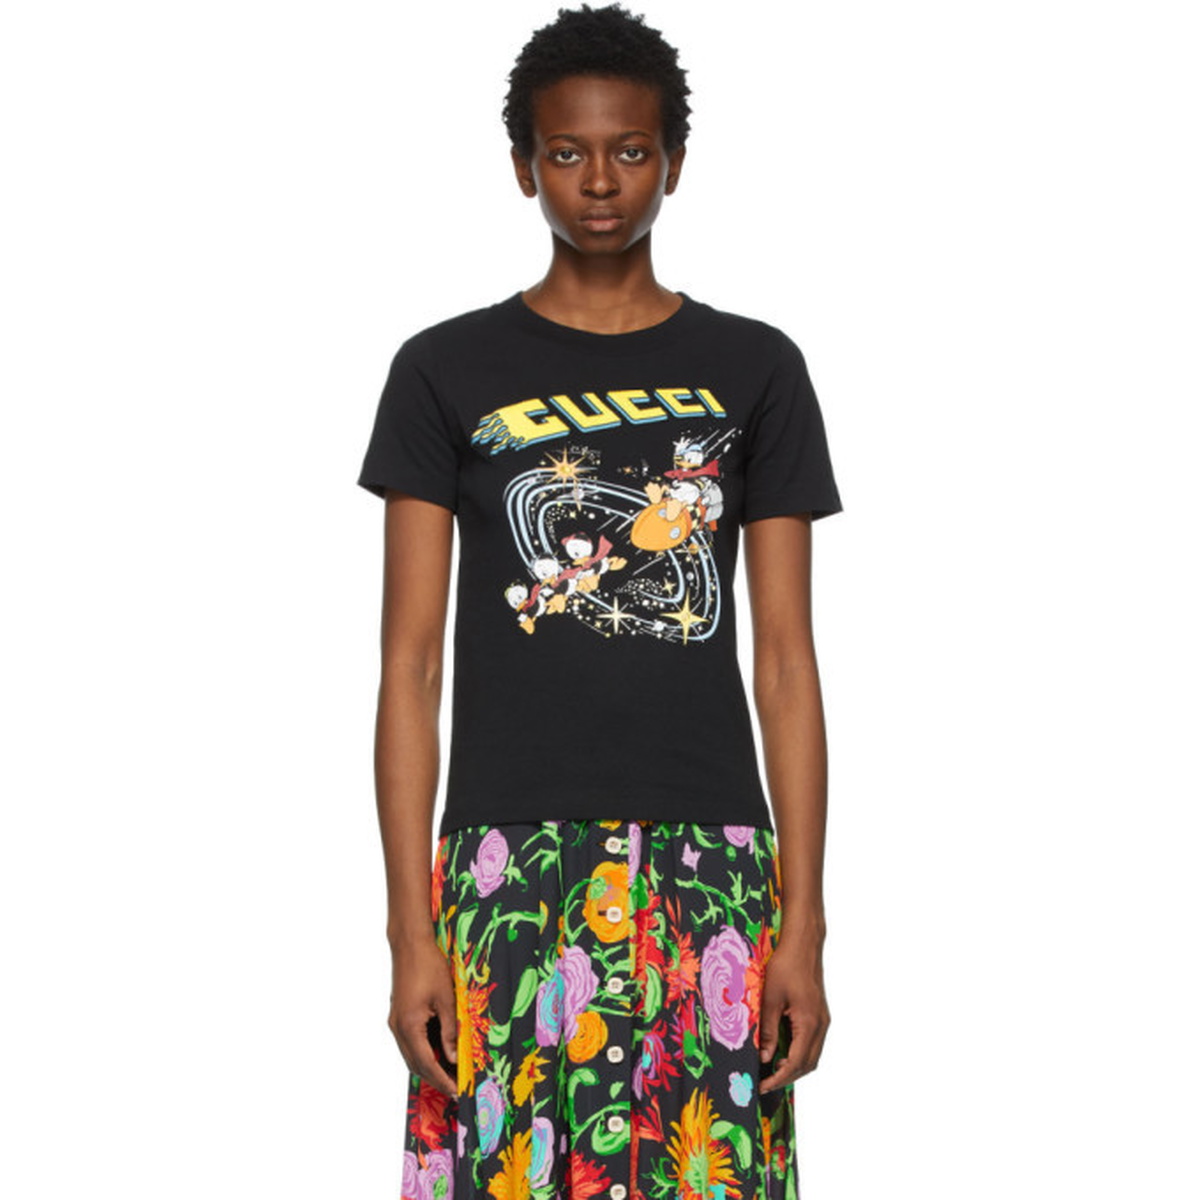 Gucci X Disney Donald Duck-embroidered Cotton T-shirt in White